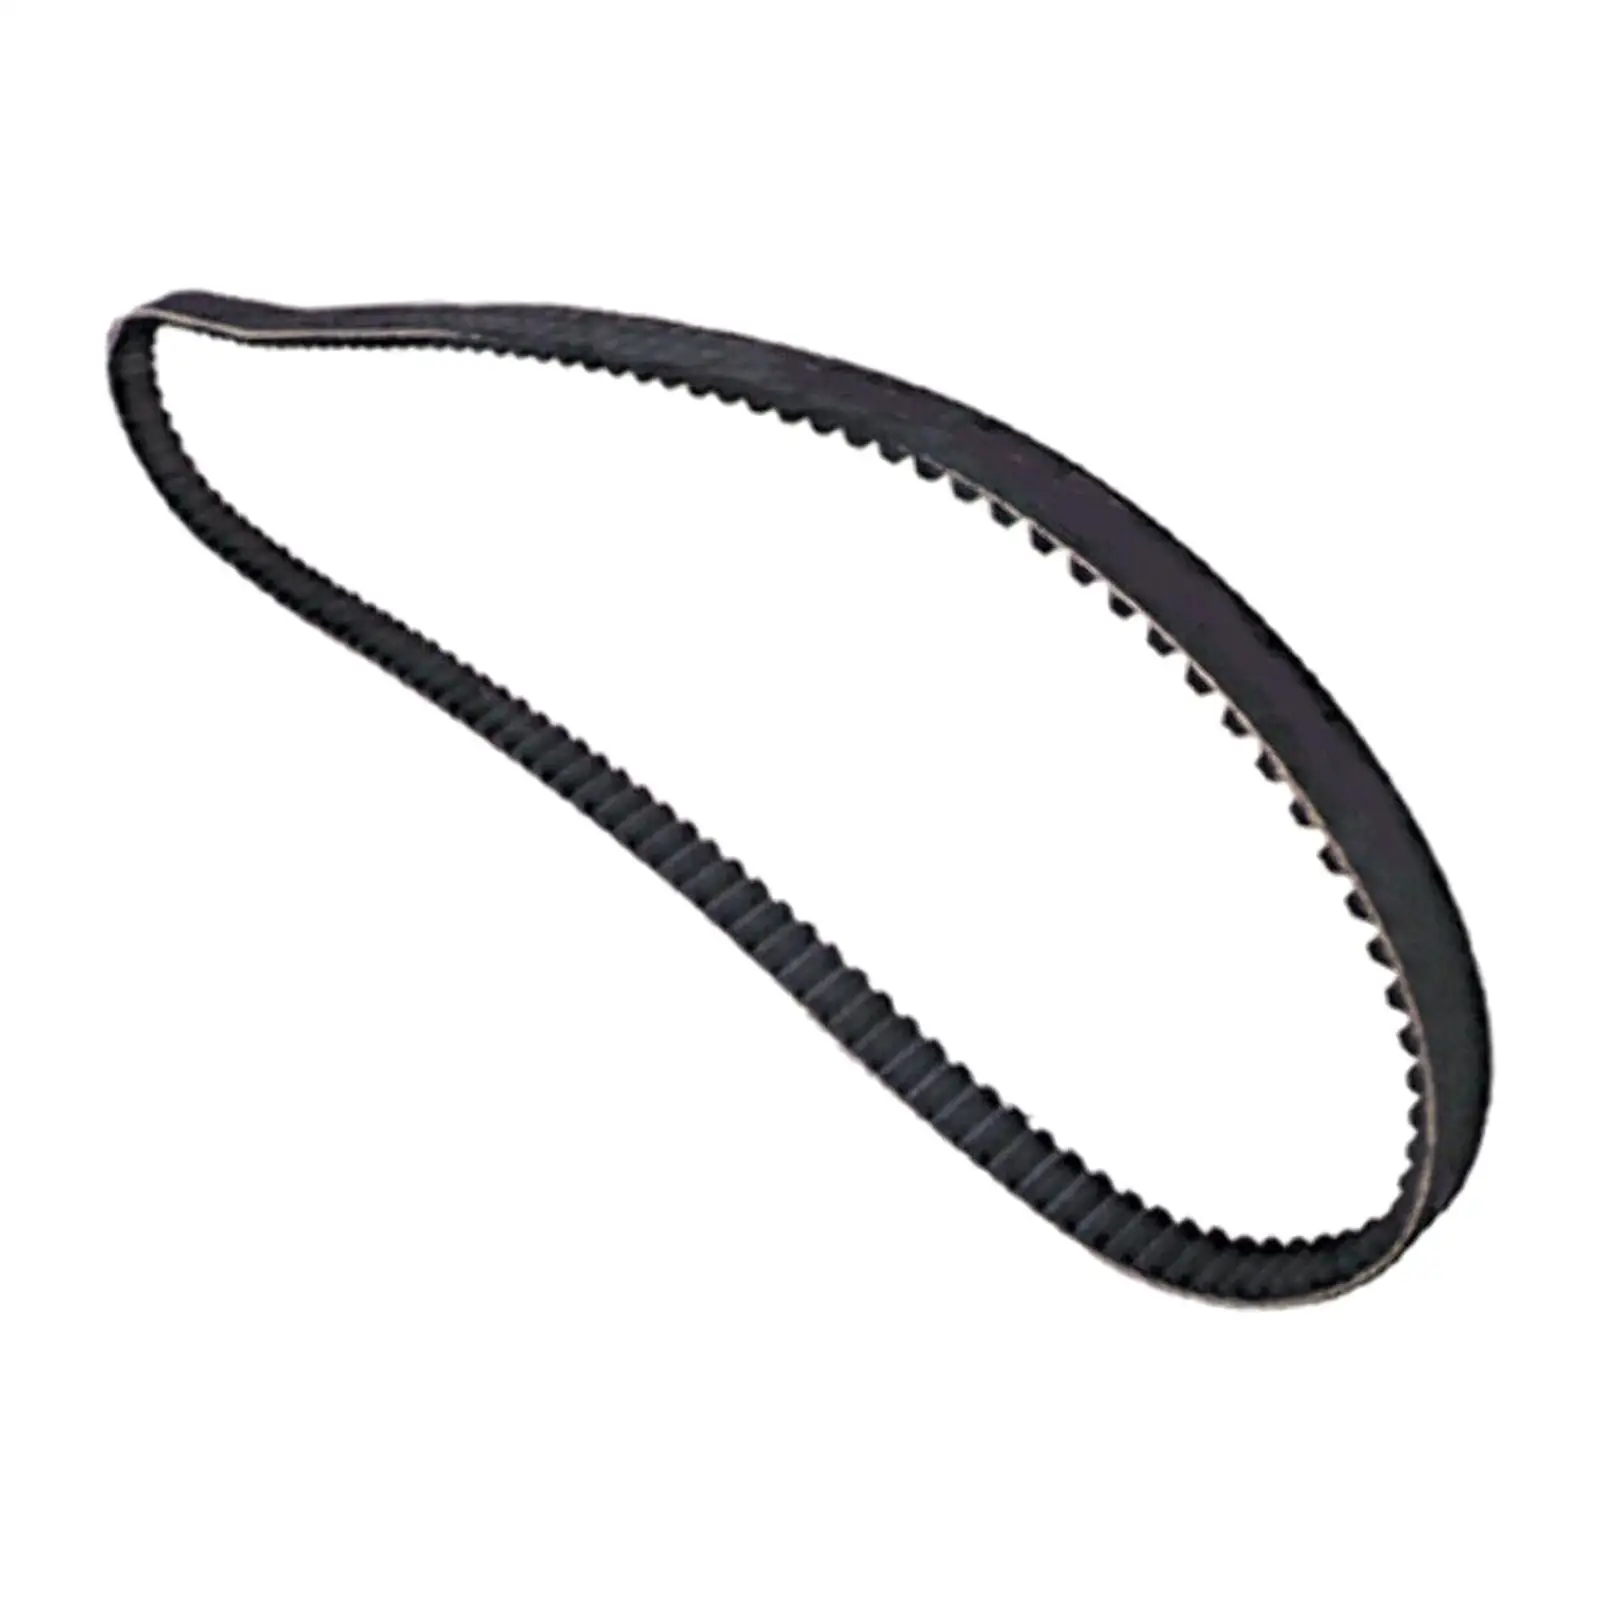 Rear Drive Belt 58-433 133 Tooth 1 1/8